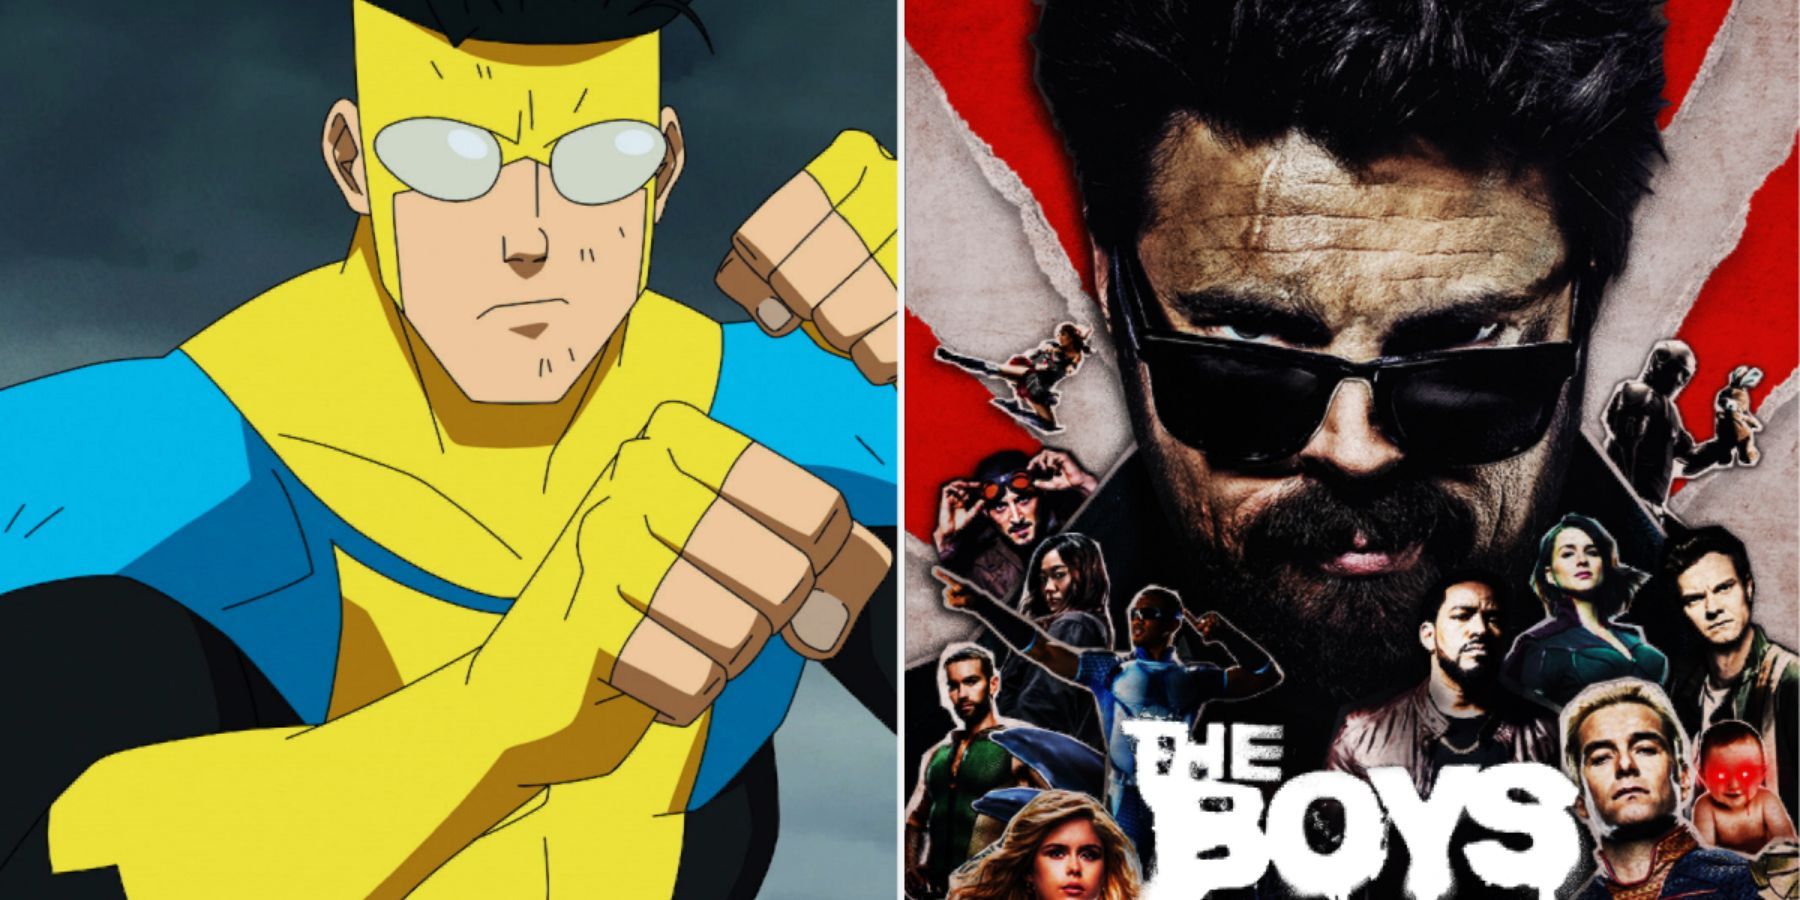 Invincible and The Boys series